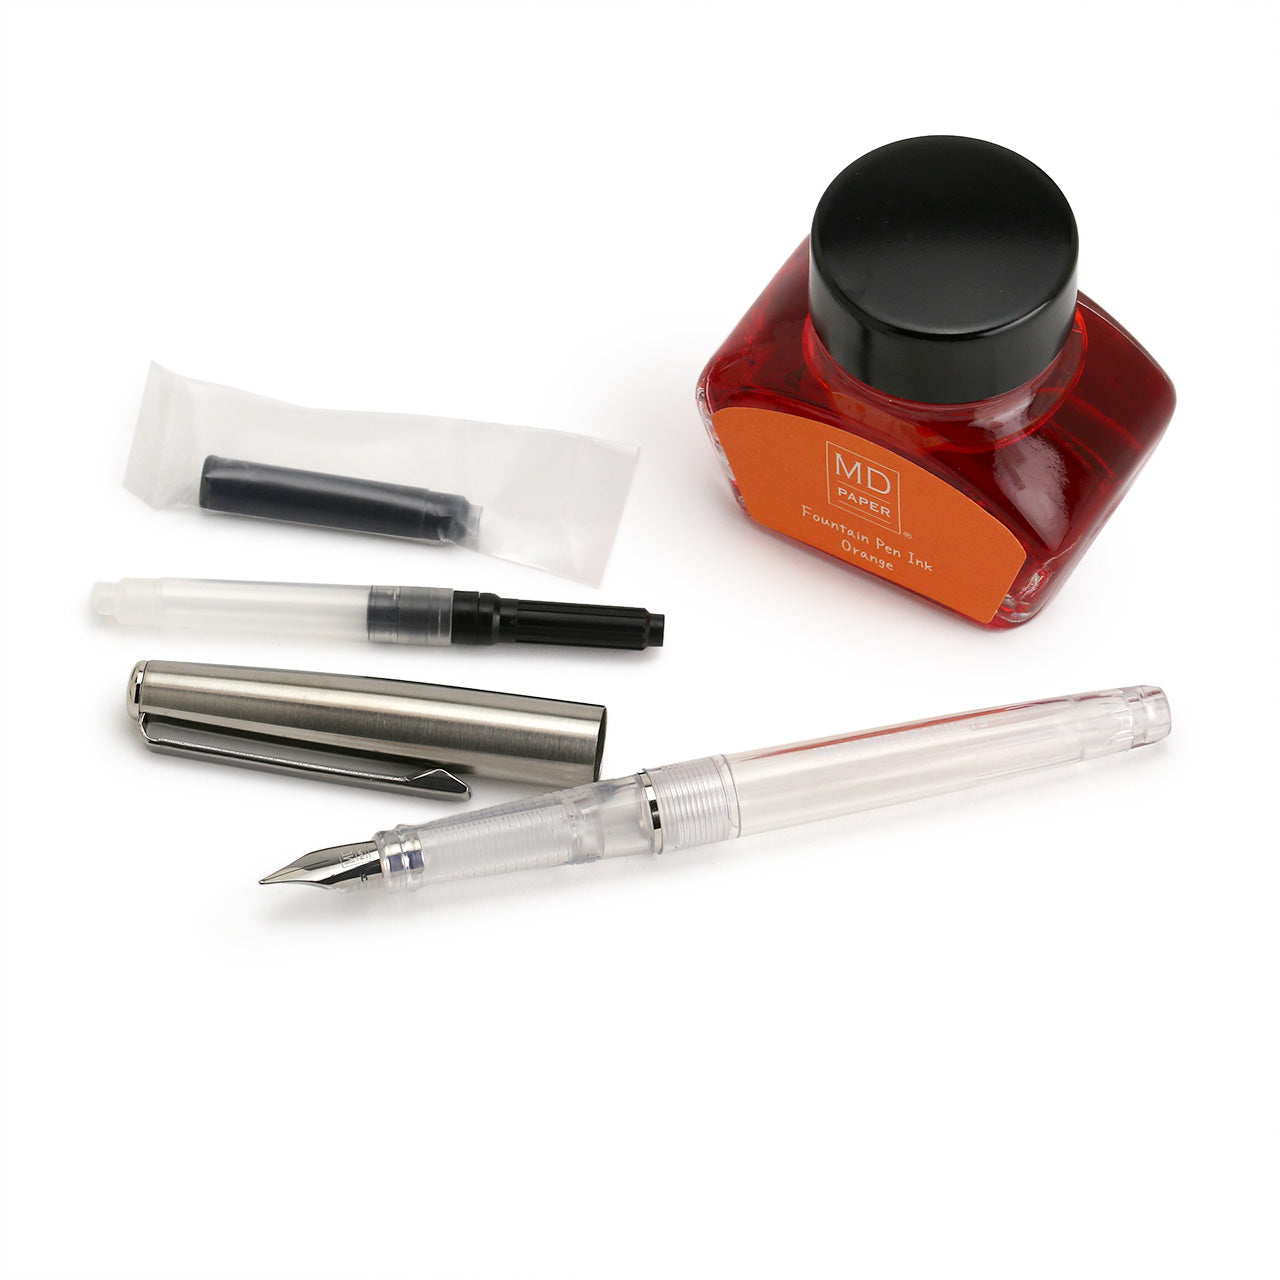 components of the Limited Edition Fountain Pen set from Midori, foubtain pen, metal cap, converter,  ink cartridge and a 30ml bottle of orange fountain pen ink 